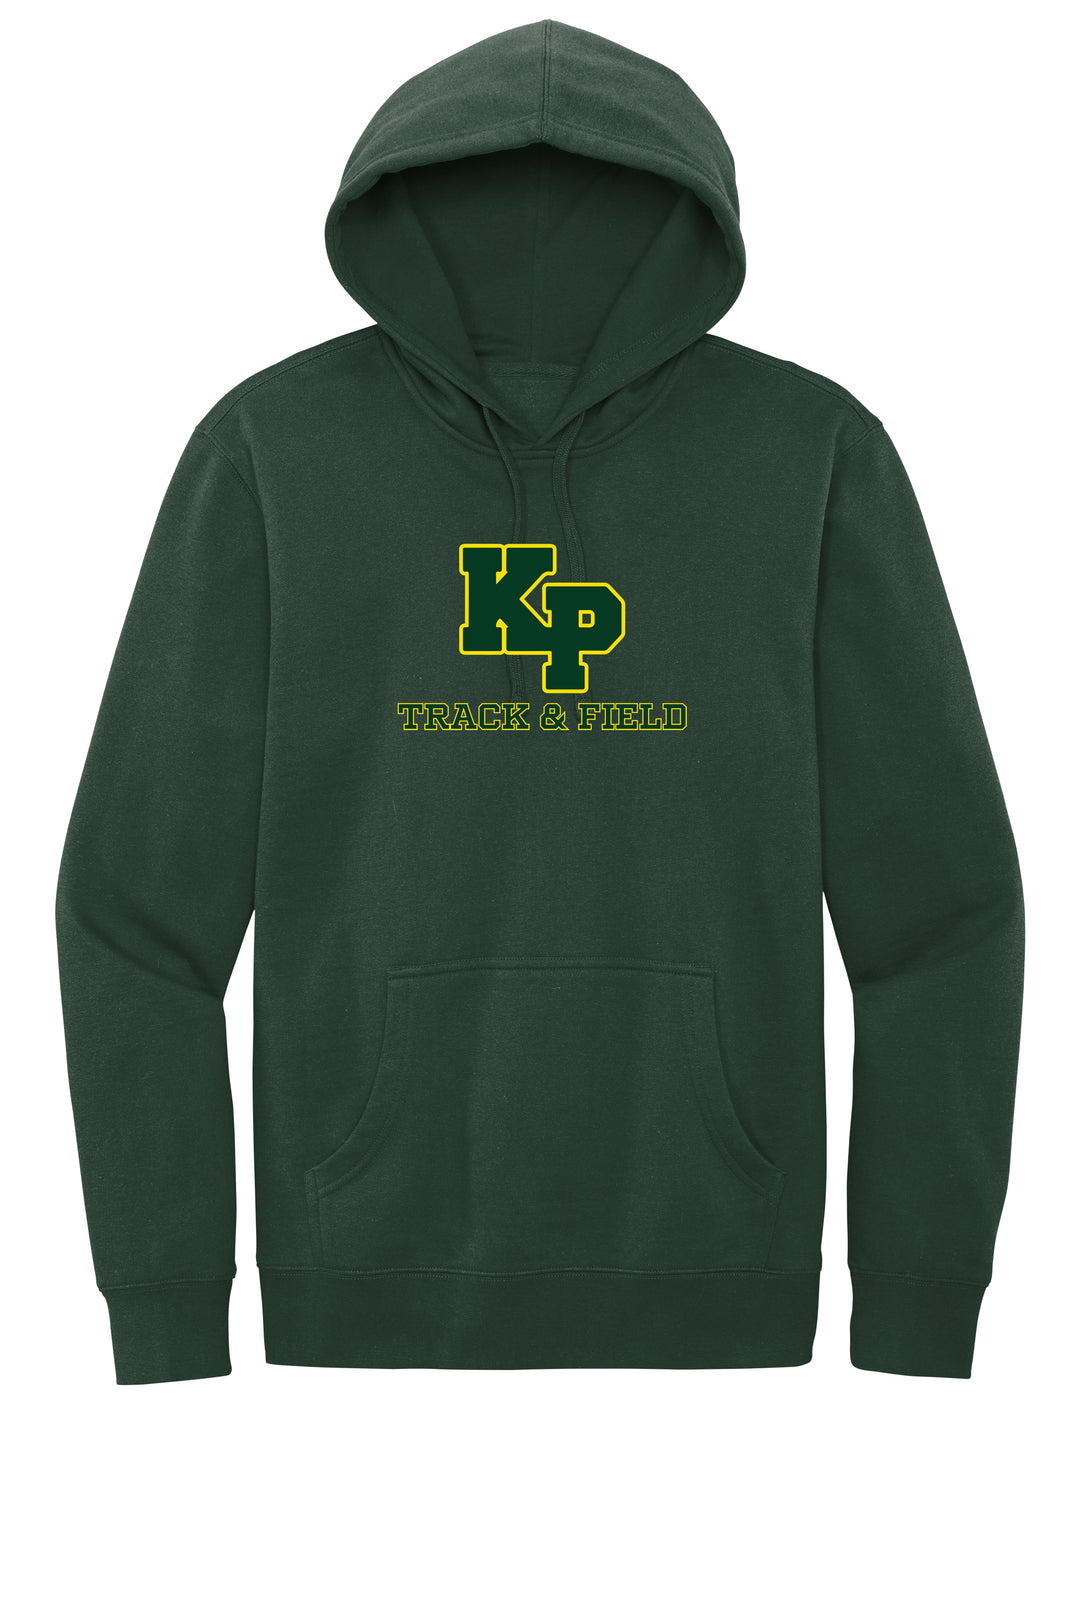 King Philip Track and Field Unisex V.I.T Fleece Hoodie (DT6100)